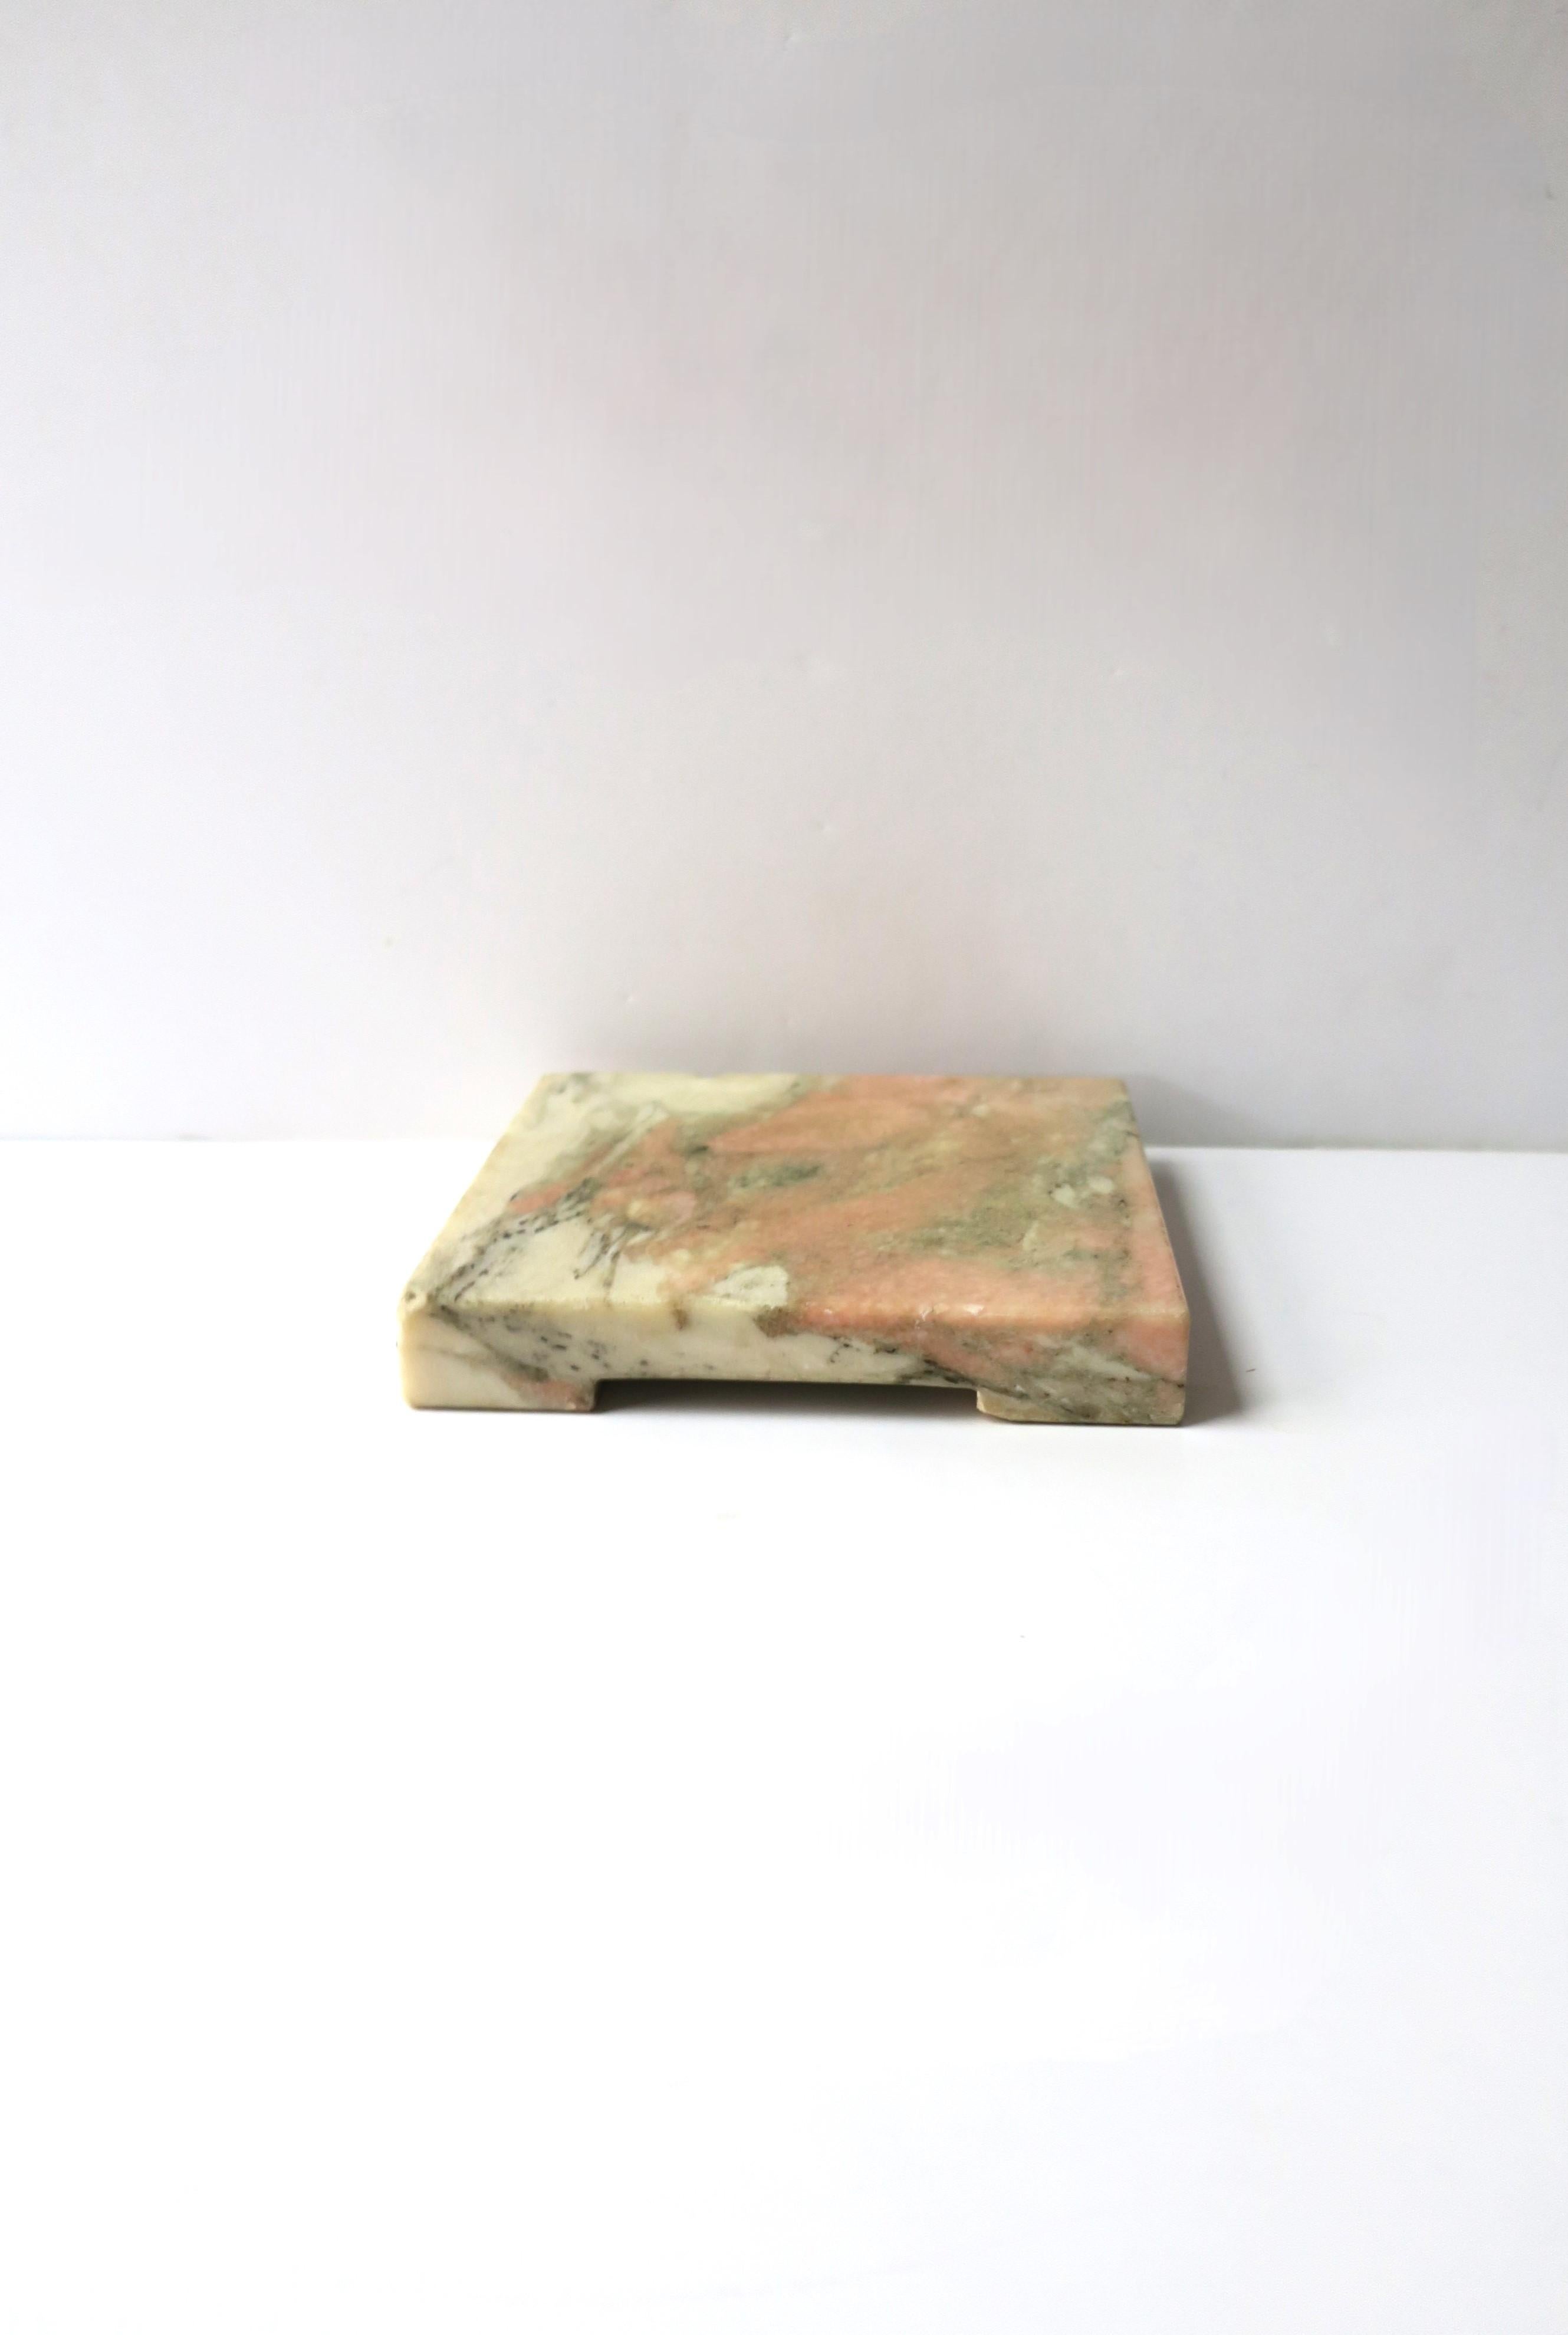 A square marble plinth element, in the Modern style, circa late-20th century. Marble colors include white, pink, and shades of grey and black. Use for sculpture, a plant, a cocktail, a display piece, etc. Many uses. Dimensions: 6